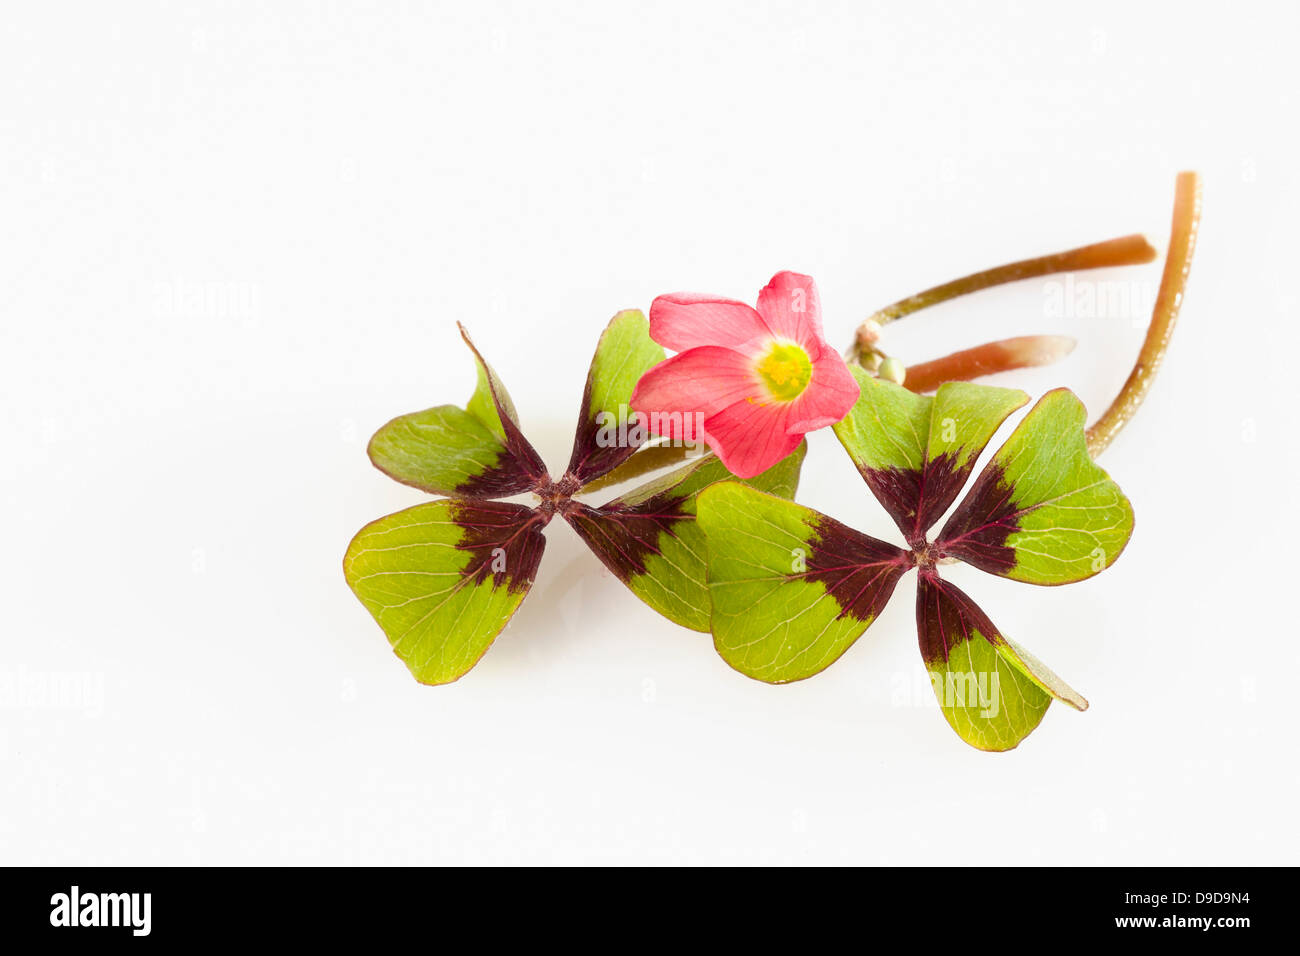 Four clover leaves with red bloom on white background, close up Stock Photo